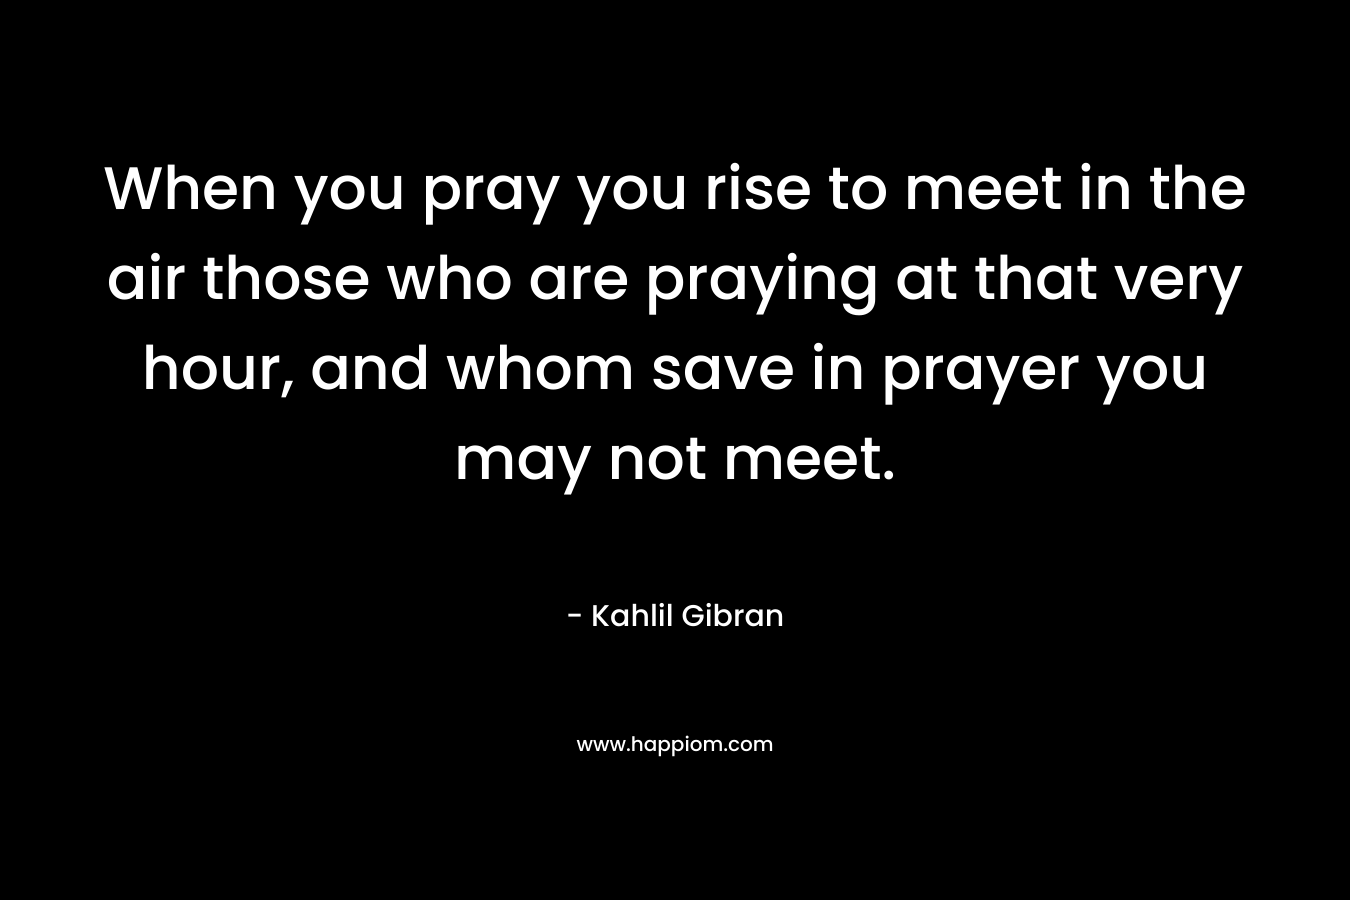 When you pray you rise to meet in the air those who are praying at that very hour, and whom save in prayer you may not meet.